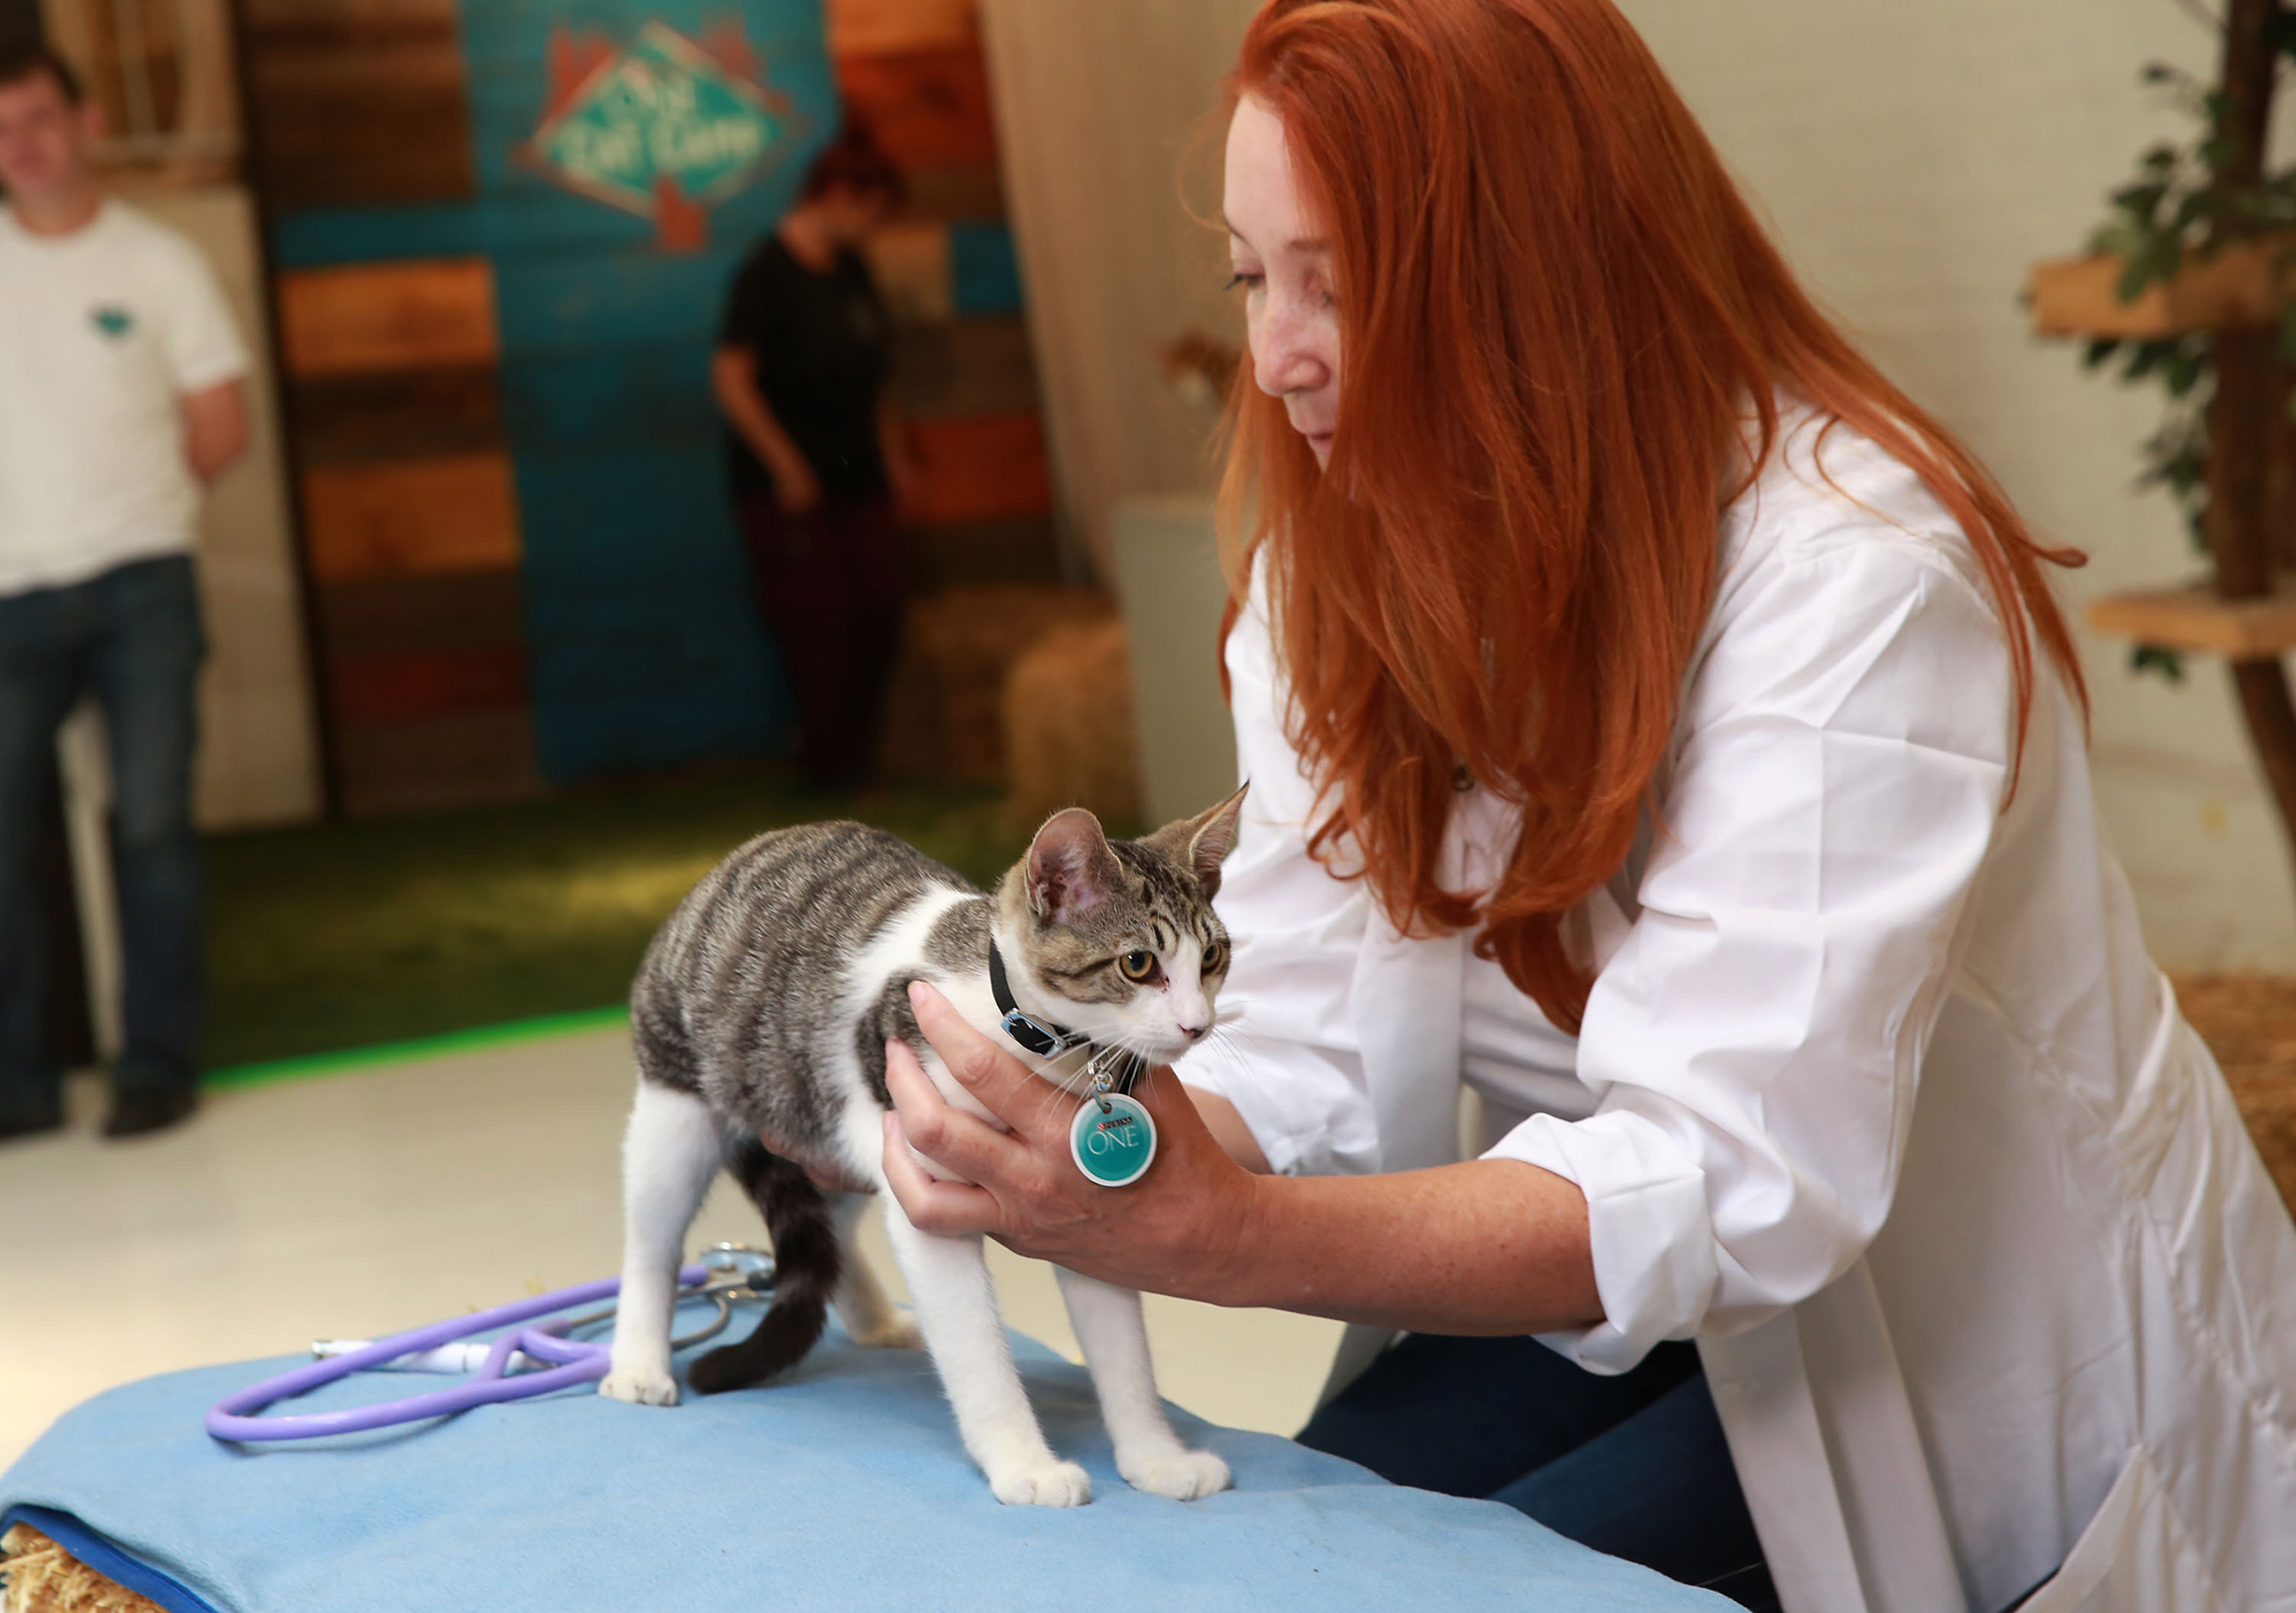 Purina Veterinarian, Deb Greco, shows campers how to check your cat for signs of whole body health at Purina ONE Cat Camp, on Thursday, July 30, 2015 in New York. (Photo by Amy Sussman/Invision for Purina ONE/AP Images)